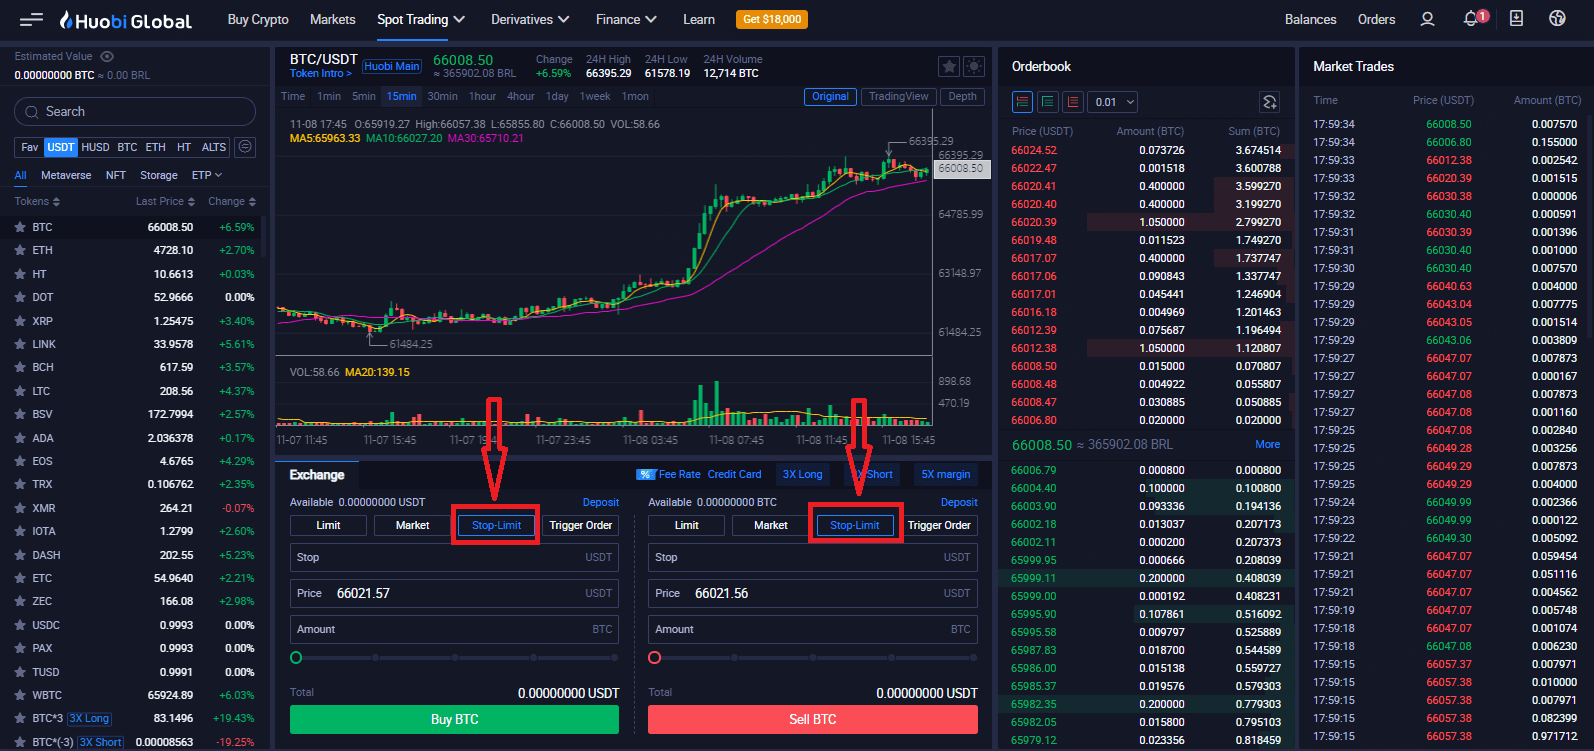 How to Start Huobi Trading in 2021: A Step-By-Step Guide for Beginners